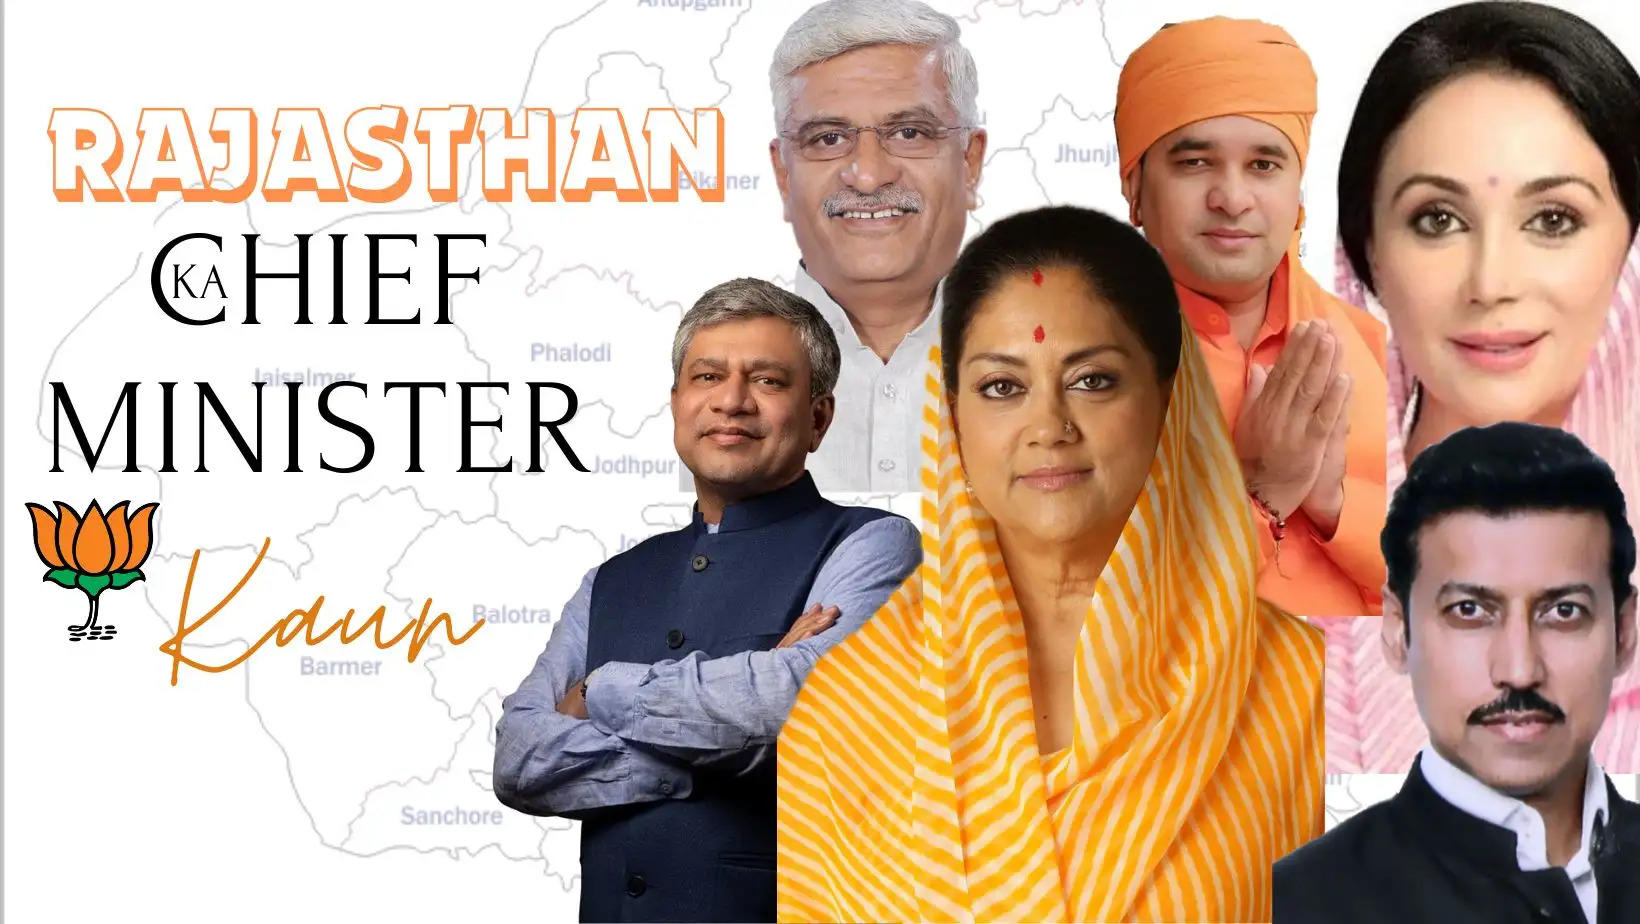 The Chief Minister of Rajasthan Announced, WHo is the CHief Minister of Rajasthan, Rajasthan Chief Minister Announced